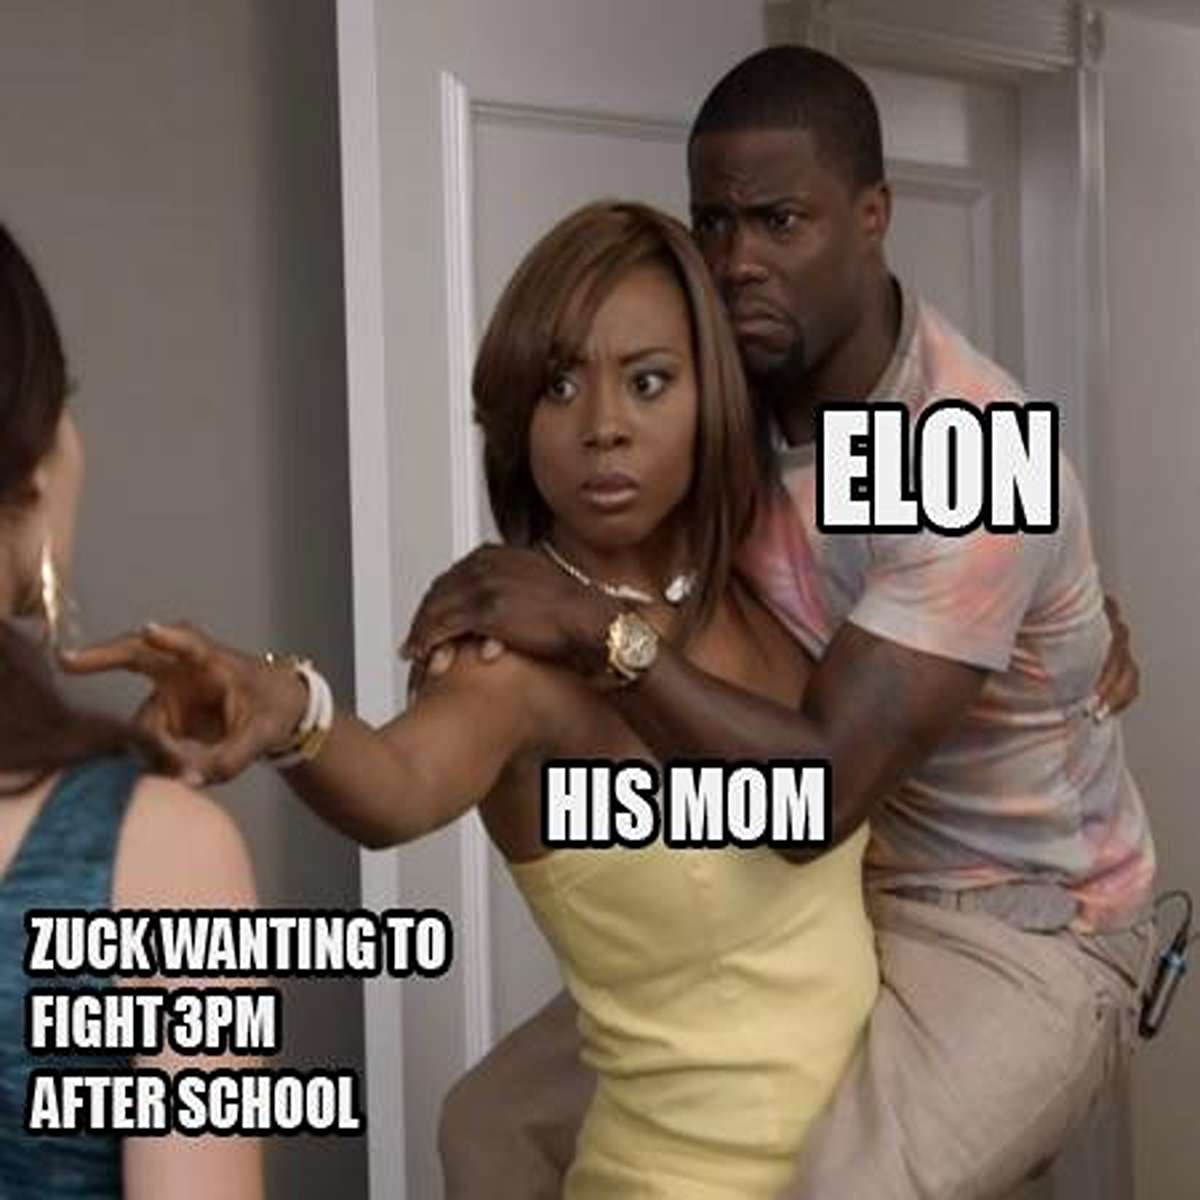 fresh memes - defend meme template - Zuck Wanting To Fight 3PM After School Elon His Mom